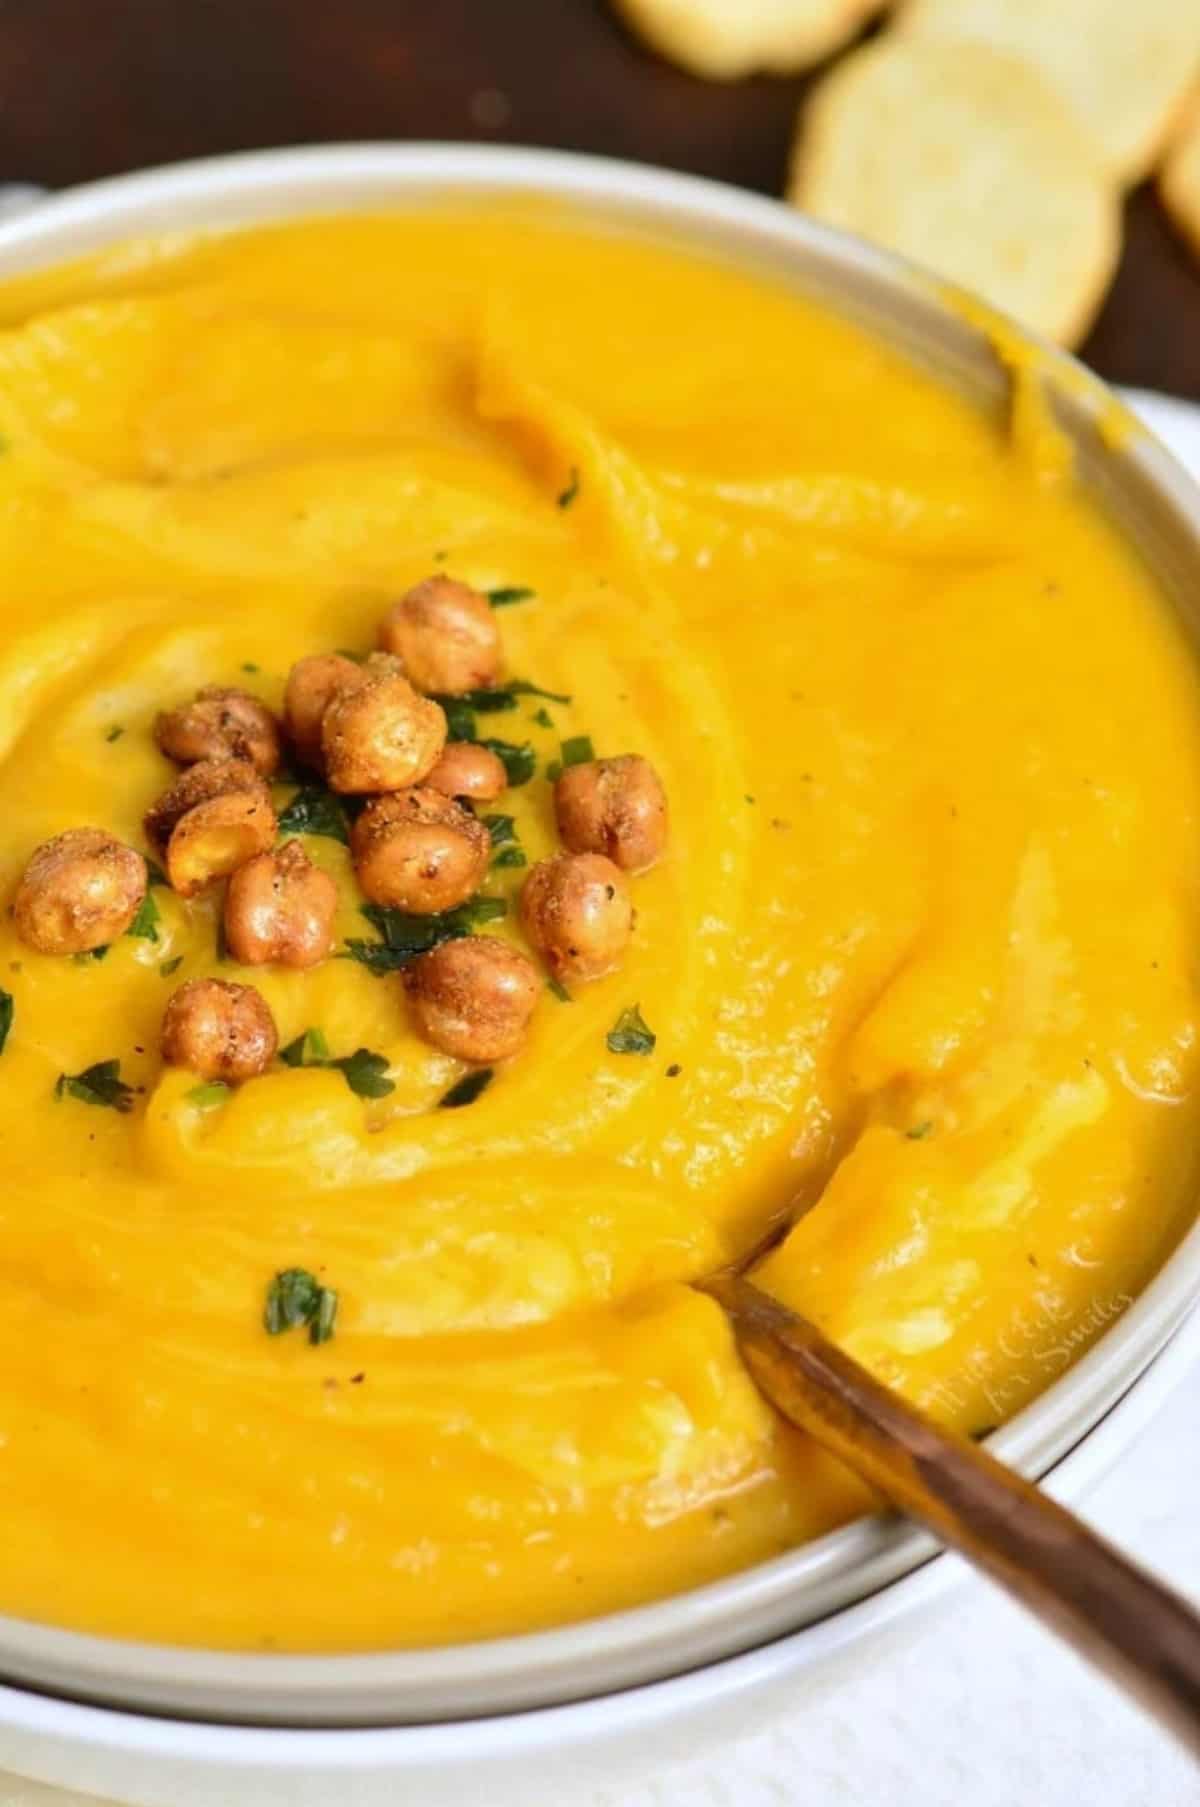 butternut squash in a bowl with chickpeas on top and a spoon in the bowl.